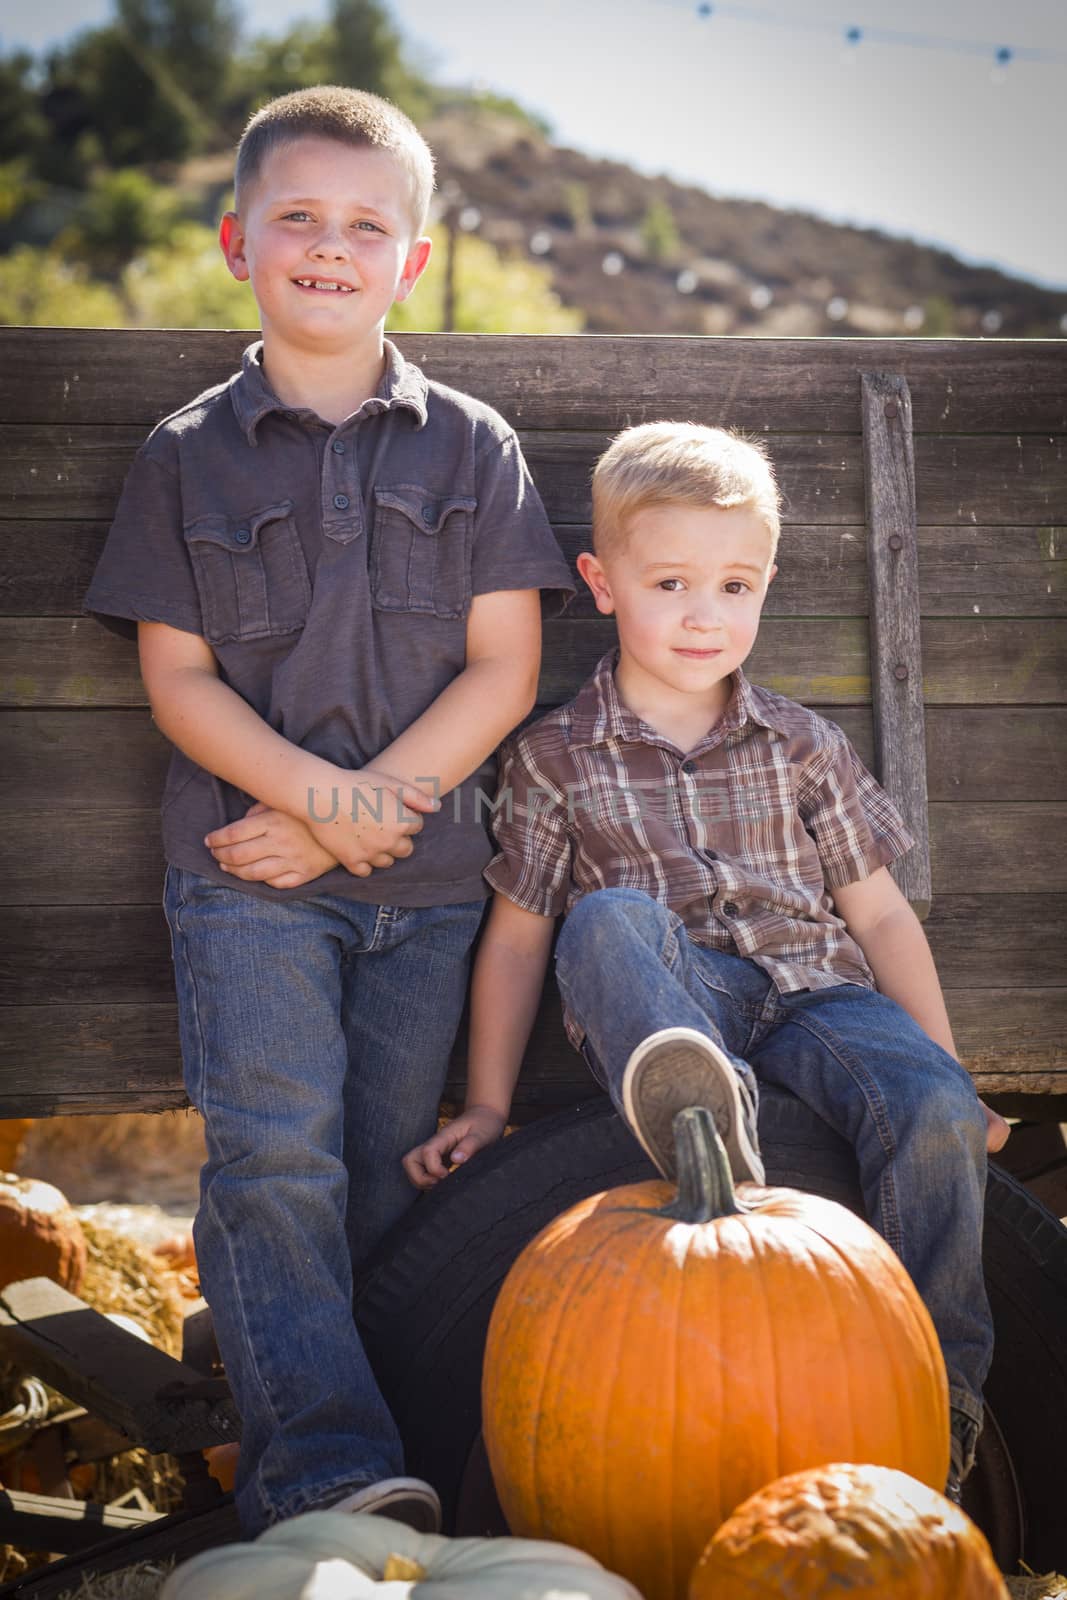 Two Young Boys at the Pumpkin Patch Leaning Against Antique Wood Wagon.